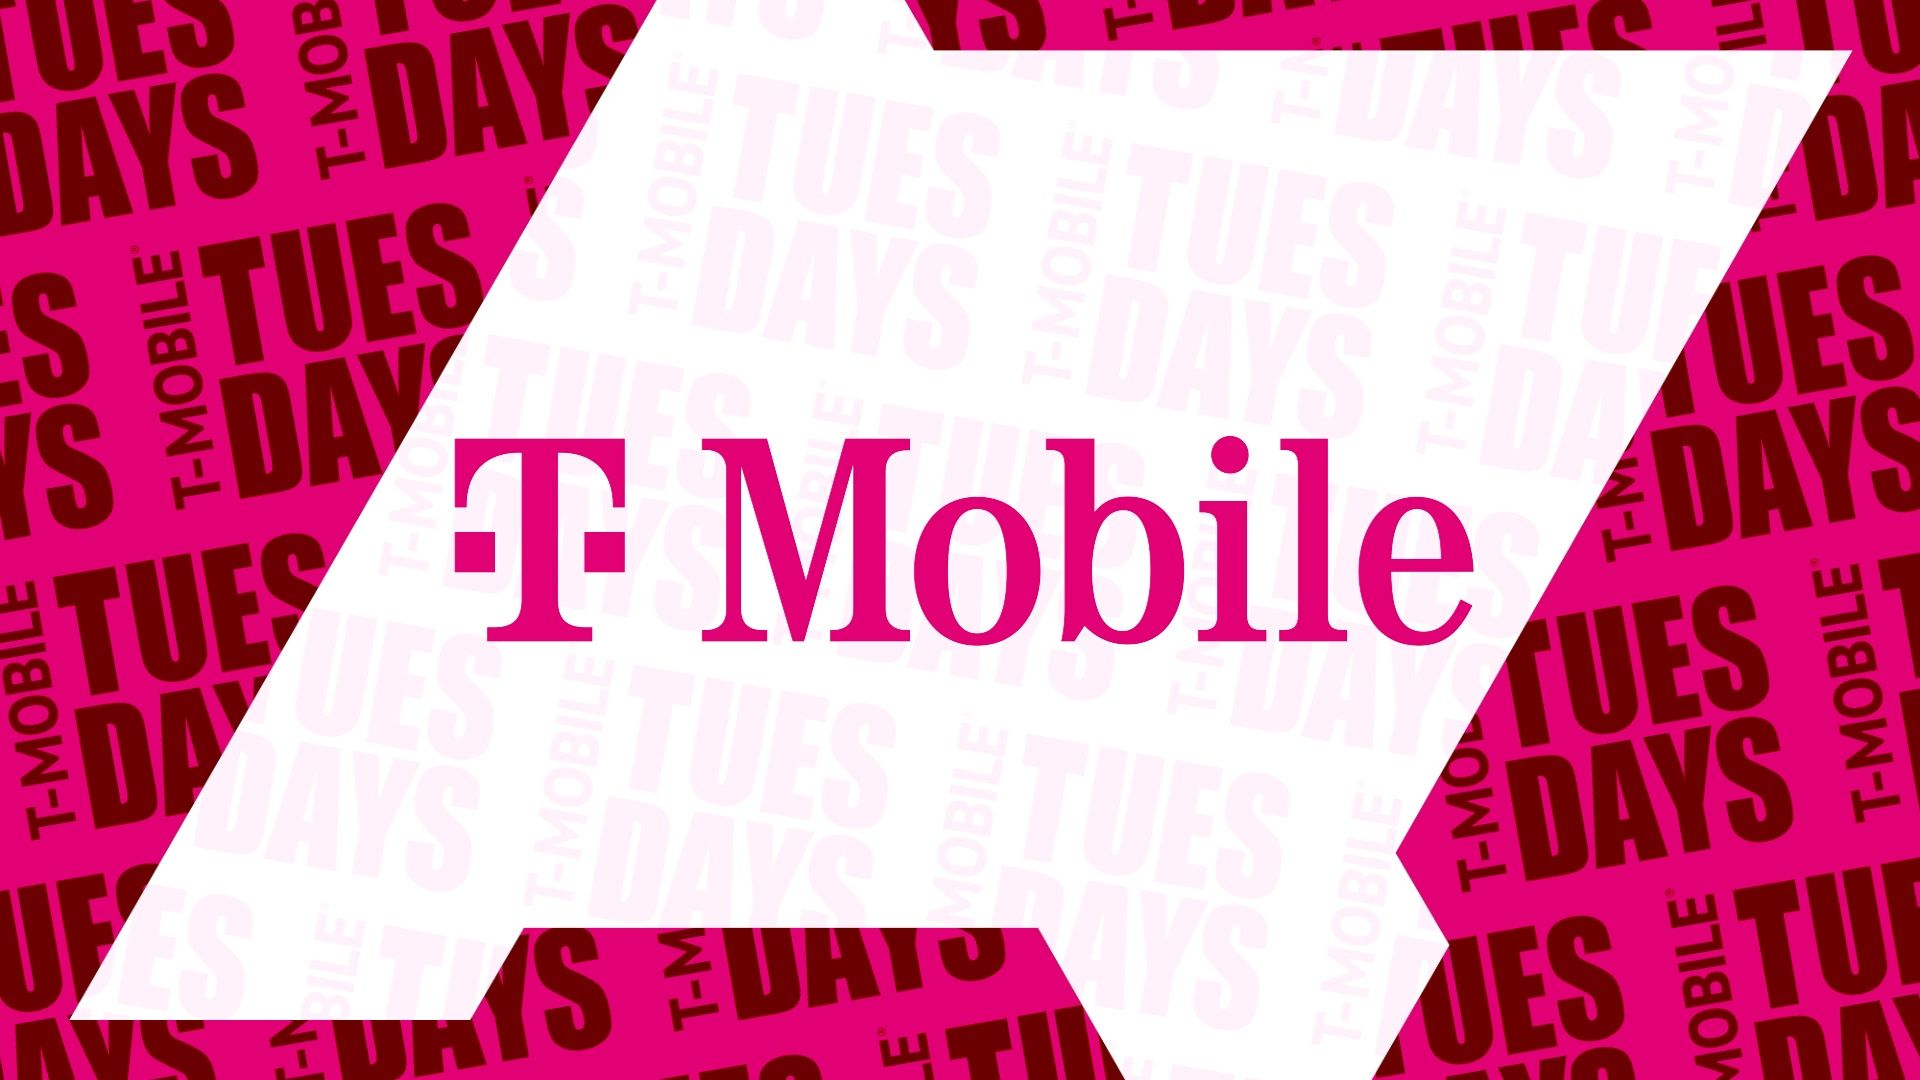 T-Mobile Tuesdays fans are getting the gift of amazing selfie lighting